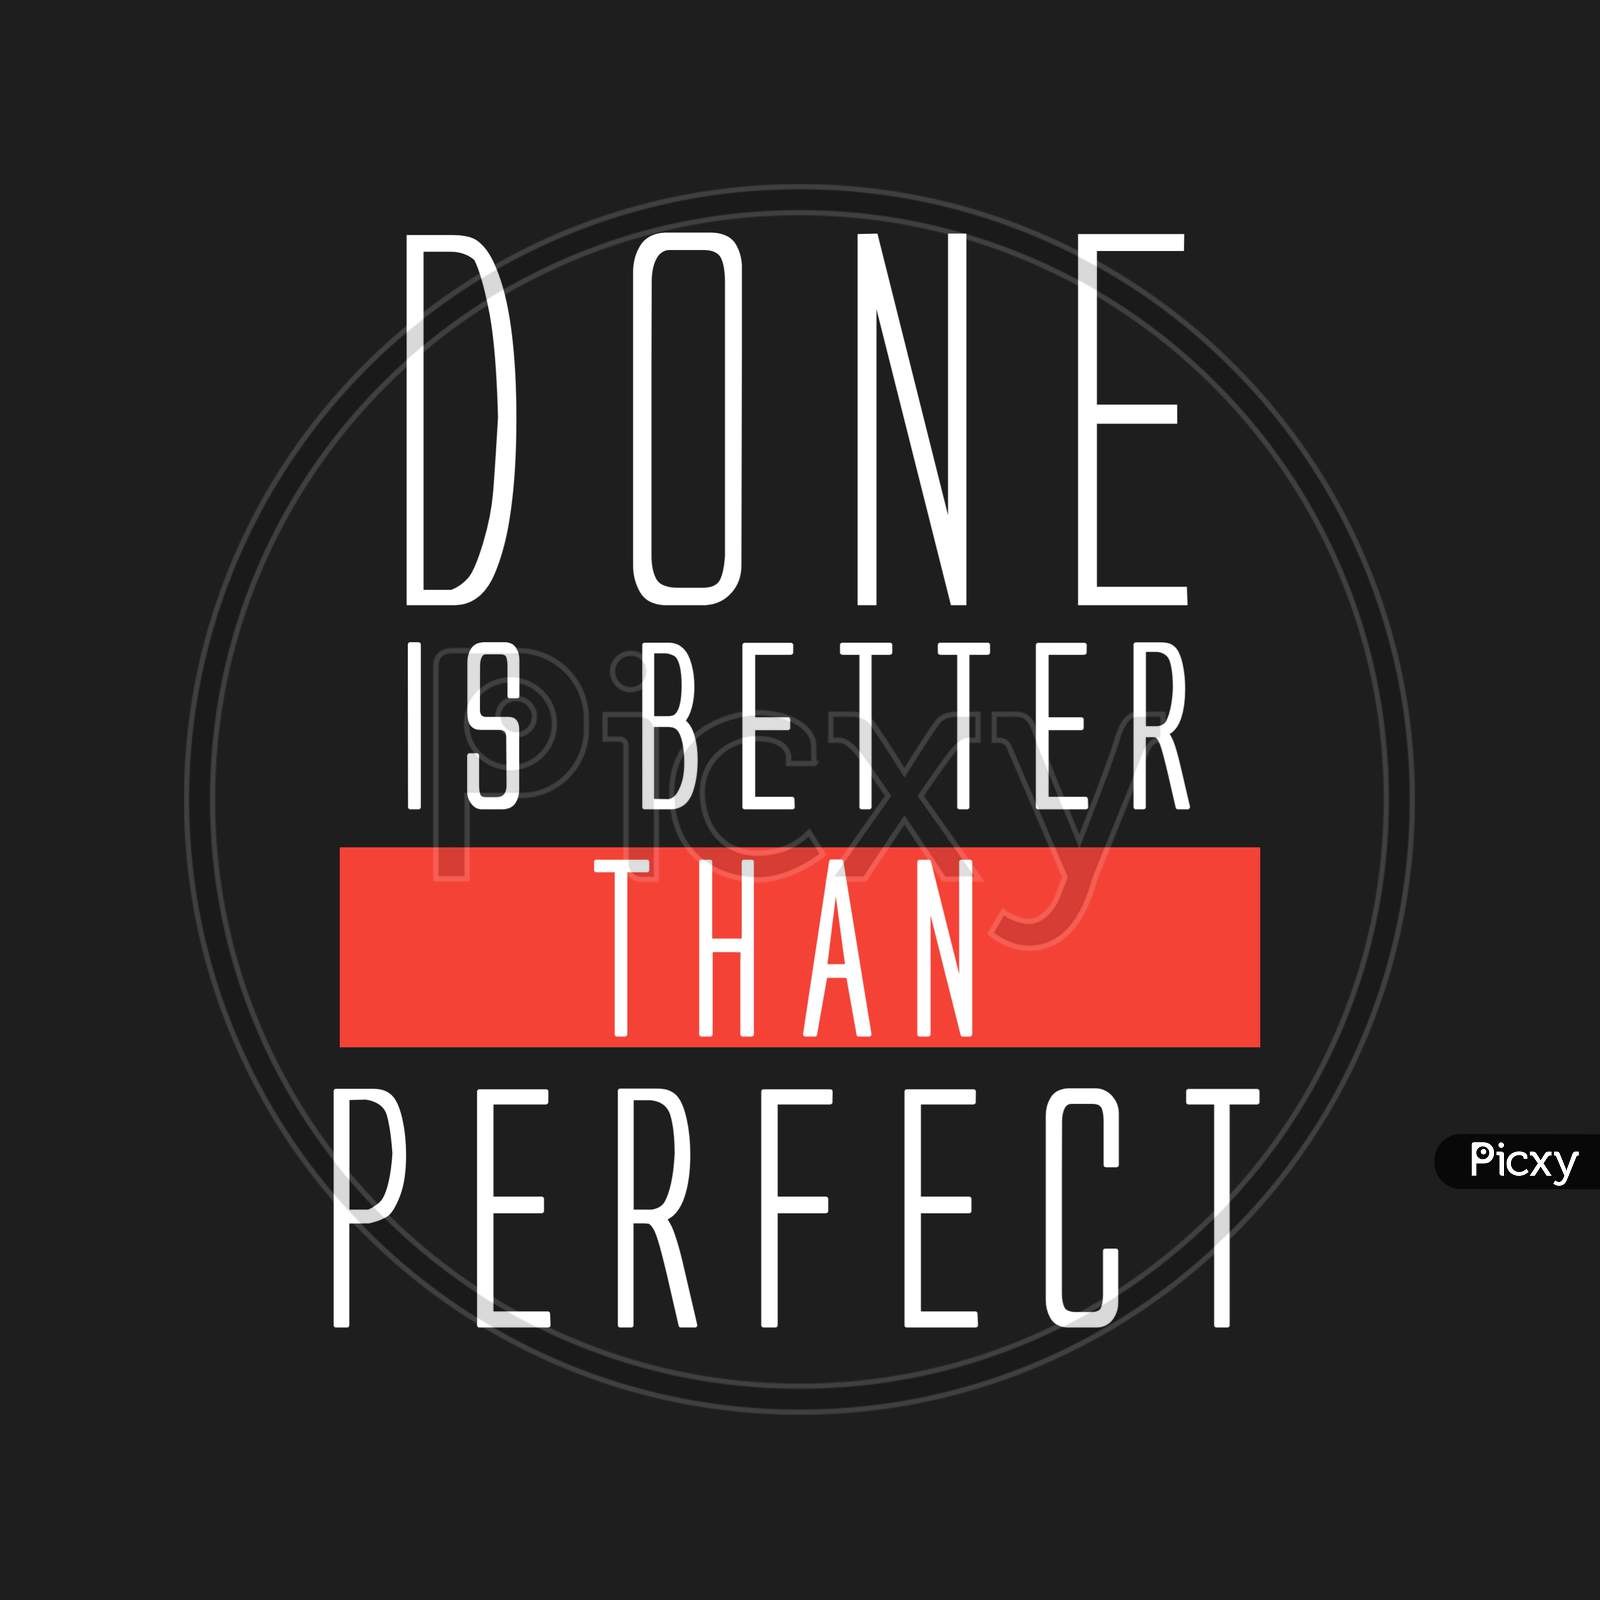 Done is Better Than Perfect (black background with white color fonts)